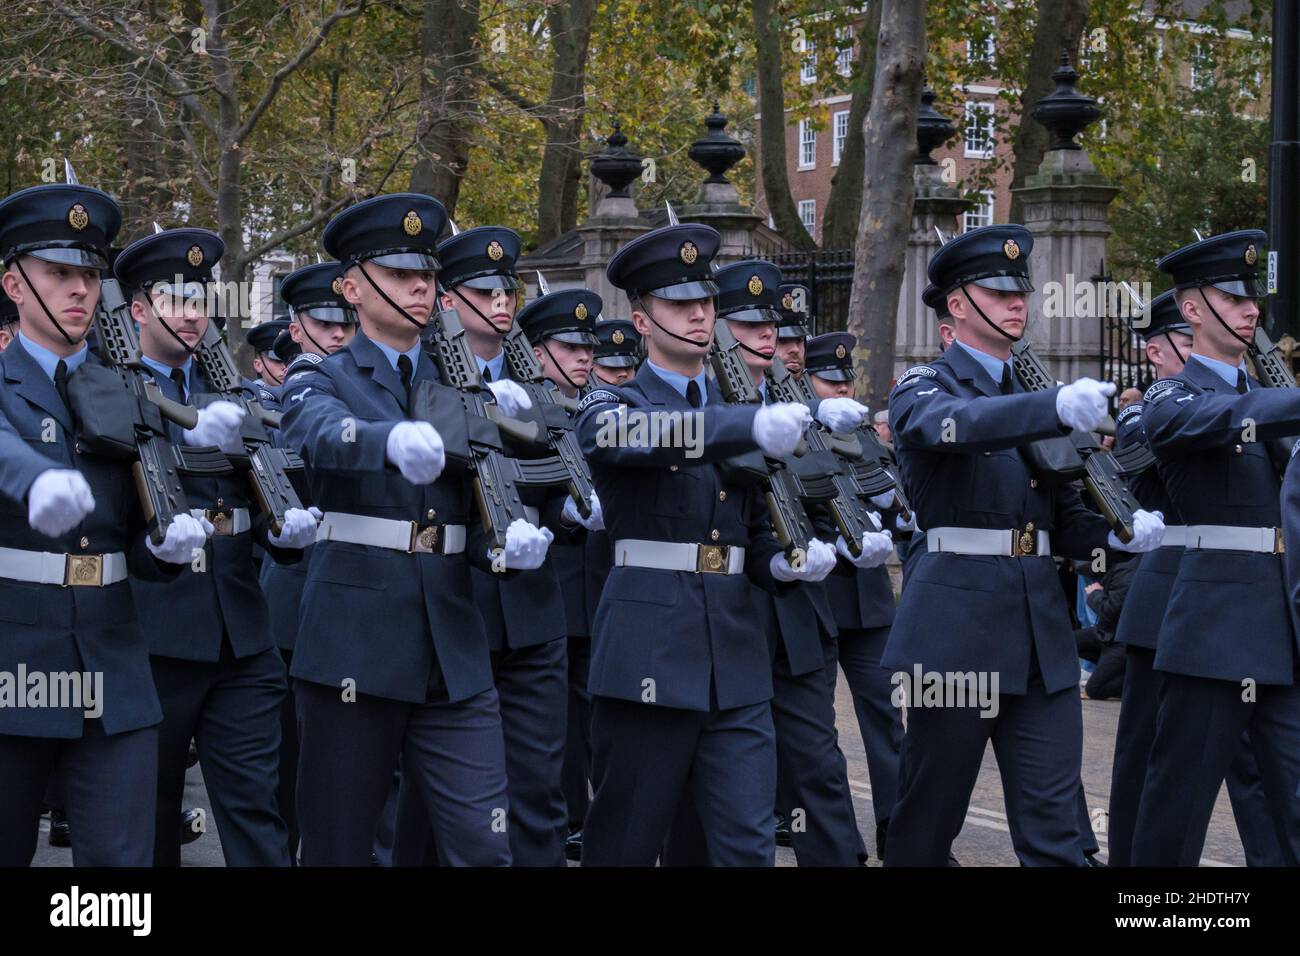 The Queen’s Colour Squadron, Royal Air Force bei der Lord Mayor’s Show 2021 London, Victoria Embankment, England. Stockfoto